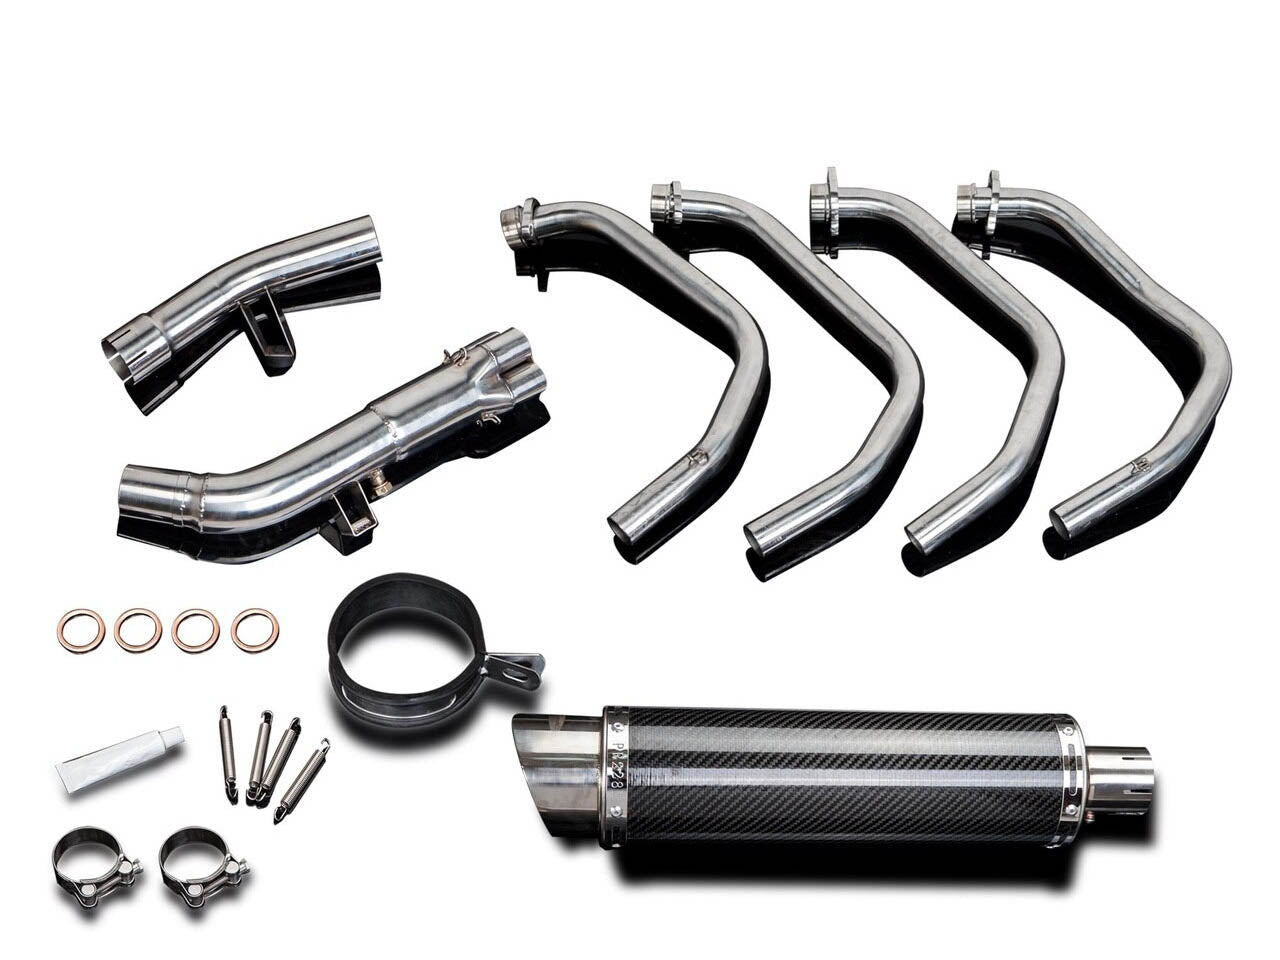 DELKEVIC Suzuki GSX1250FA Traveller Full Exhaust System with DL10 14" Carbon Silencer